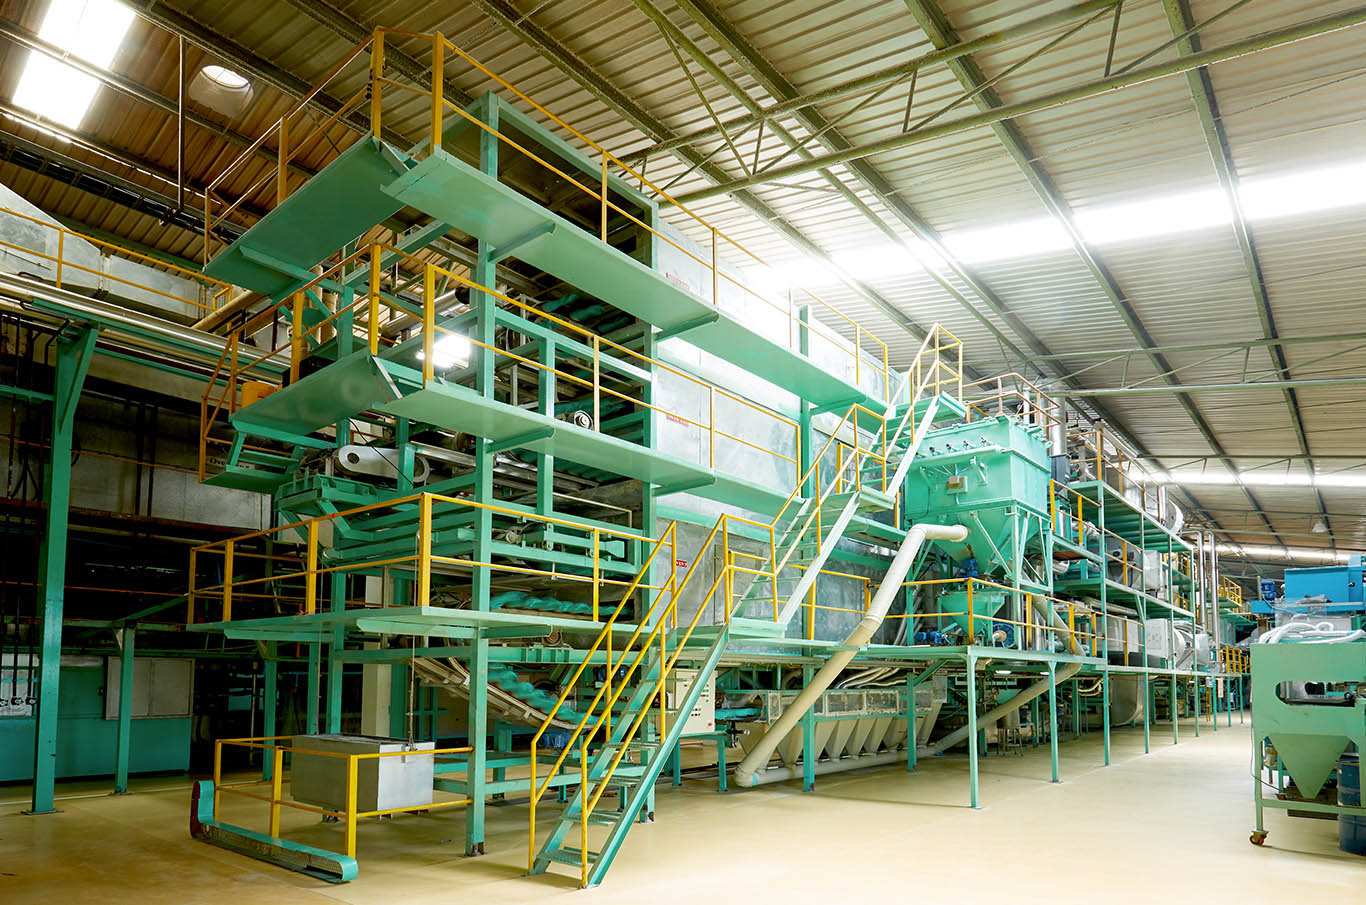 gloves manufacturing lines, gloves lines, glove auto stripping machine, glove packaging lines, gloves continuous production lines, gloves batch production lines, conveyor belts, biomass boilers, modern design, เครื่องจักรผลิตถุงมือ, เครื่องจักรผลิตแบบต่อเนื่อง, เครื่องจักรผลิตแบบ batch, เครื่องถอดถุงมืออัตโนมัติ, แม่พิมพ์ถุงมือ, เครื่องจักรแบบโซ่